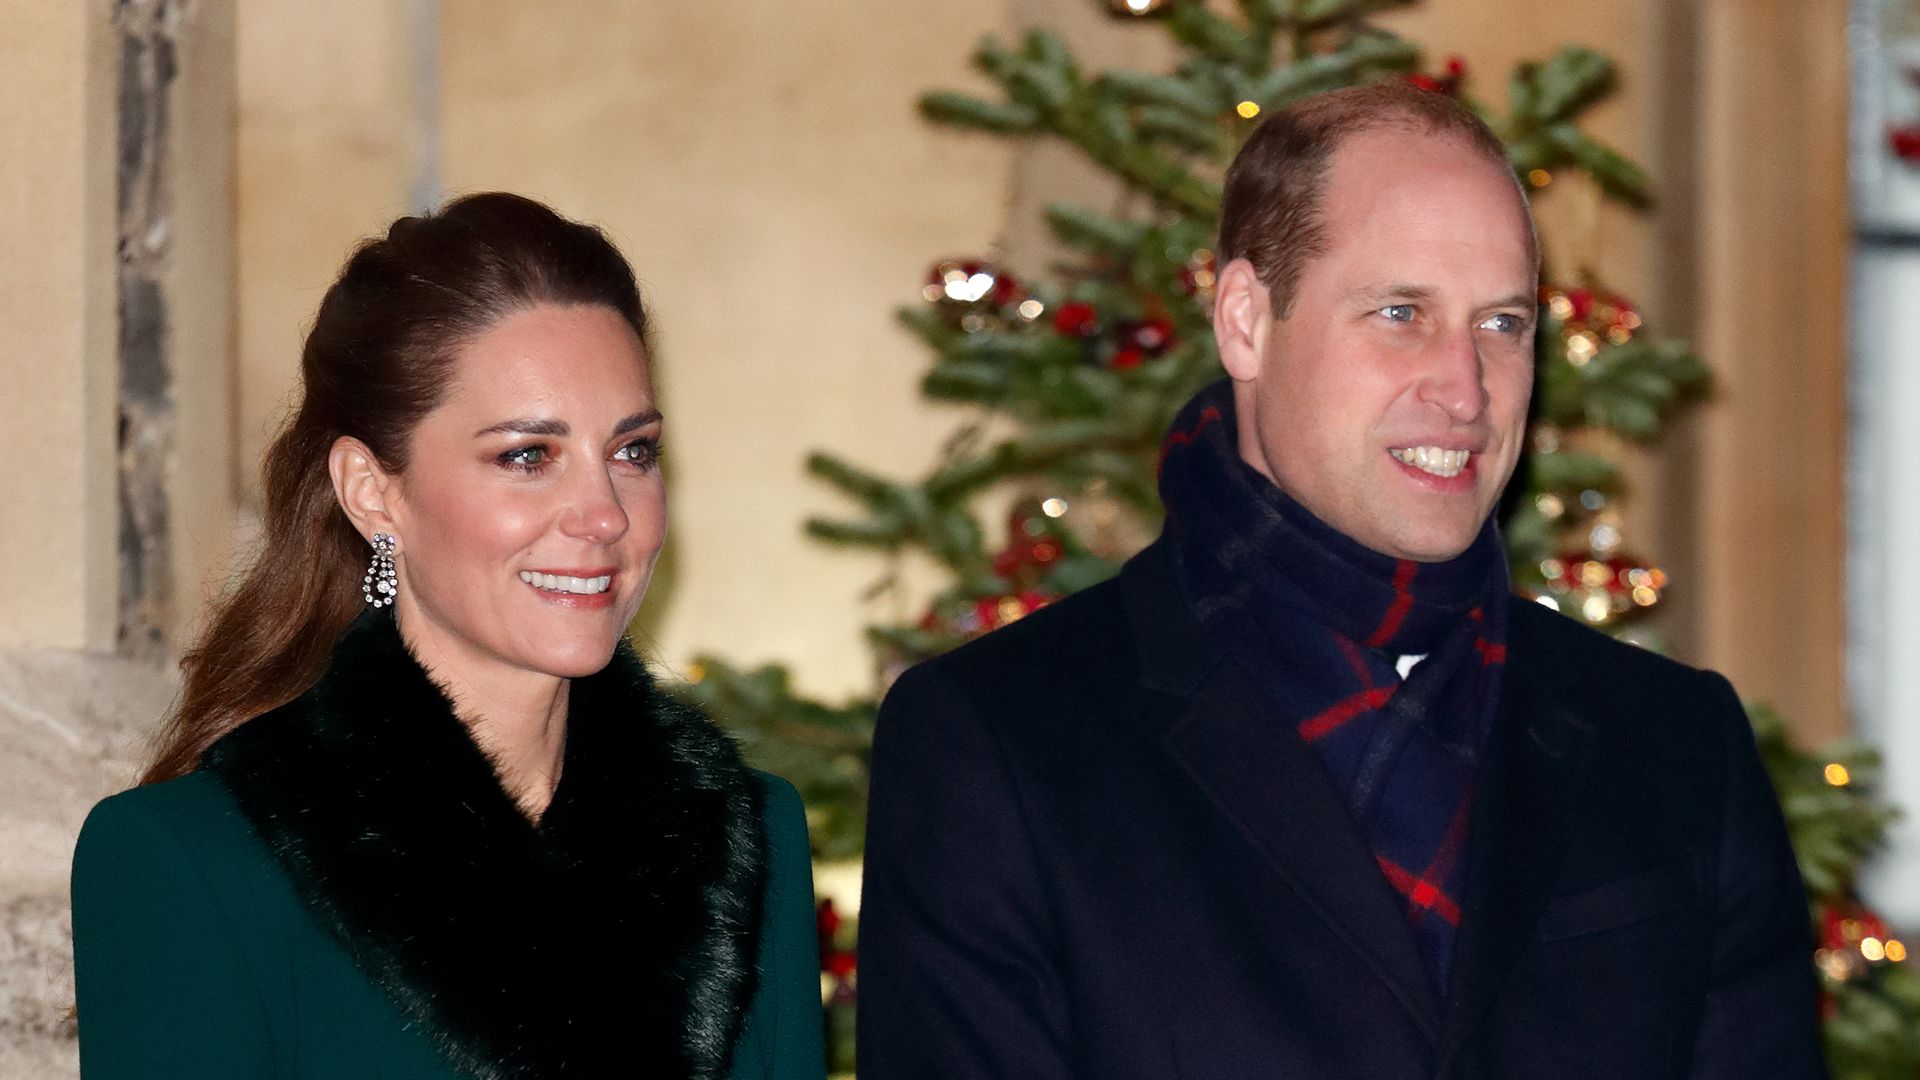 William and Kate at Windsor Castle with Christmas tree behind them